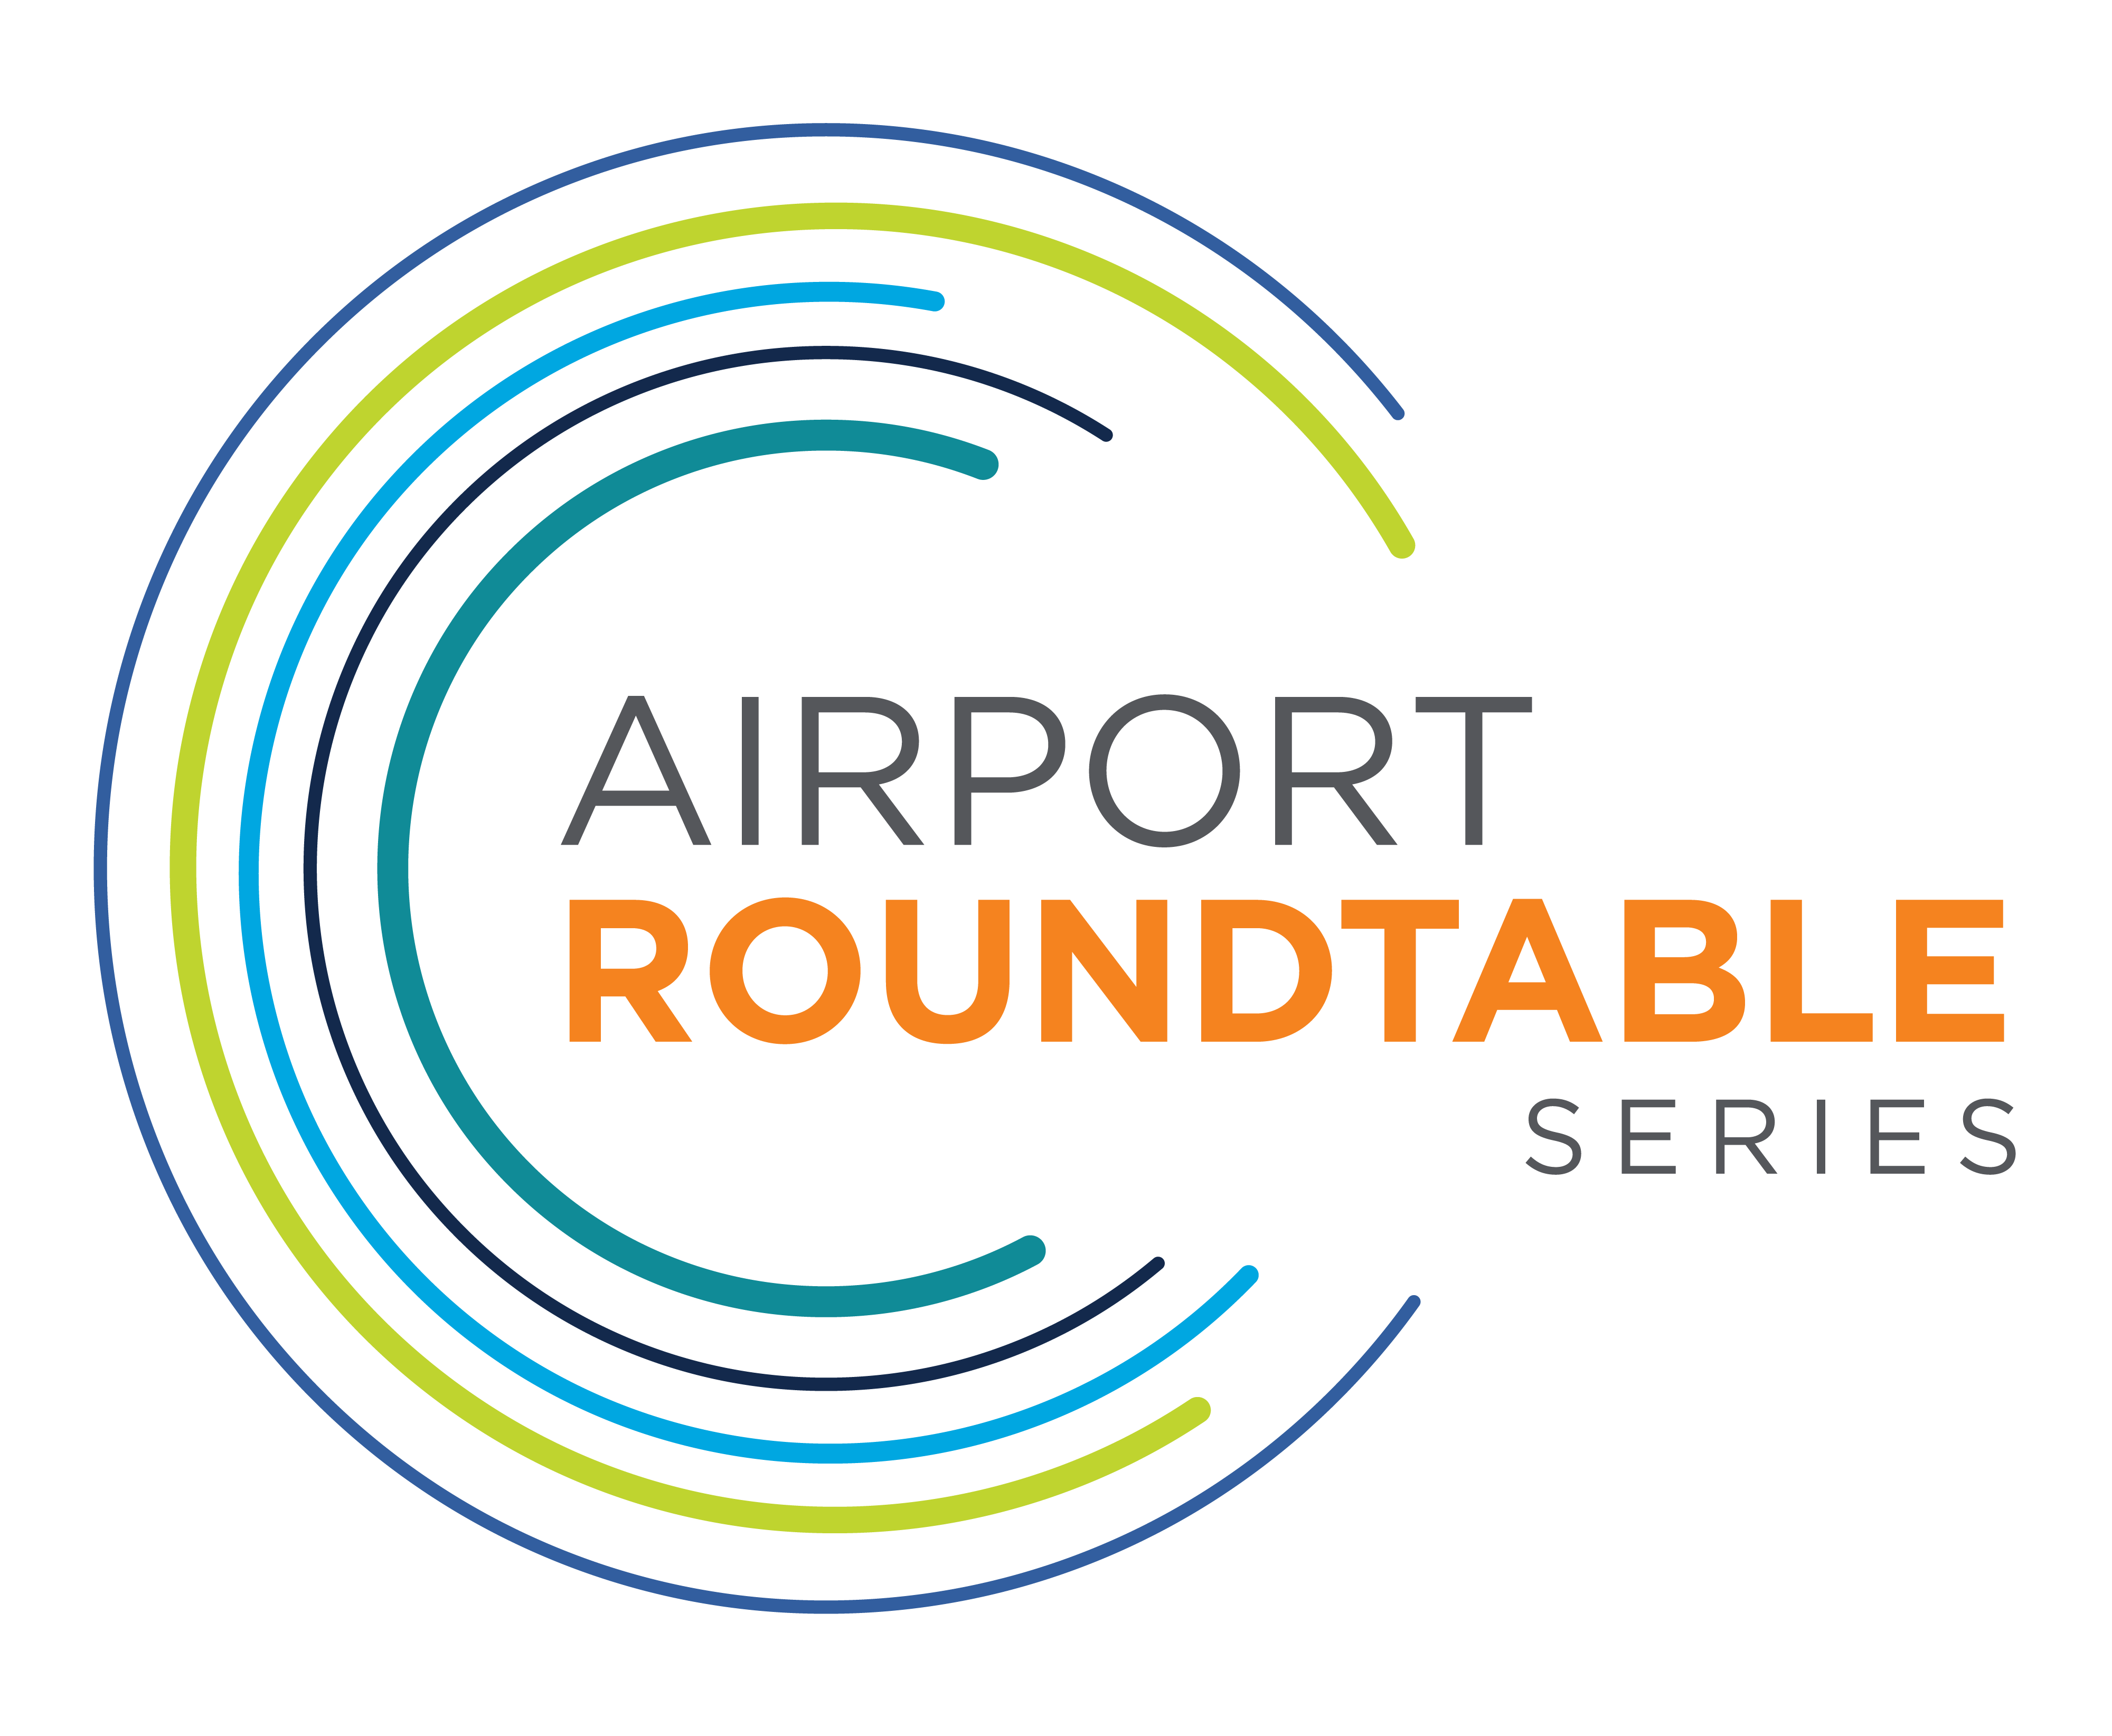 Airport Roundtable Series